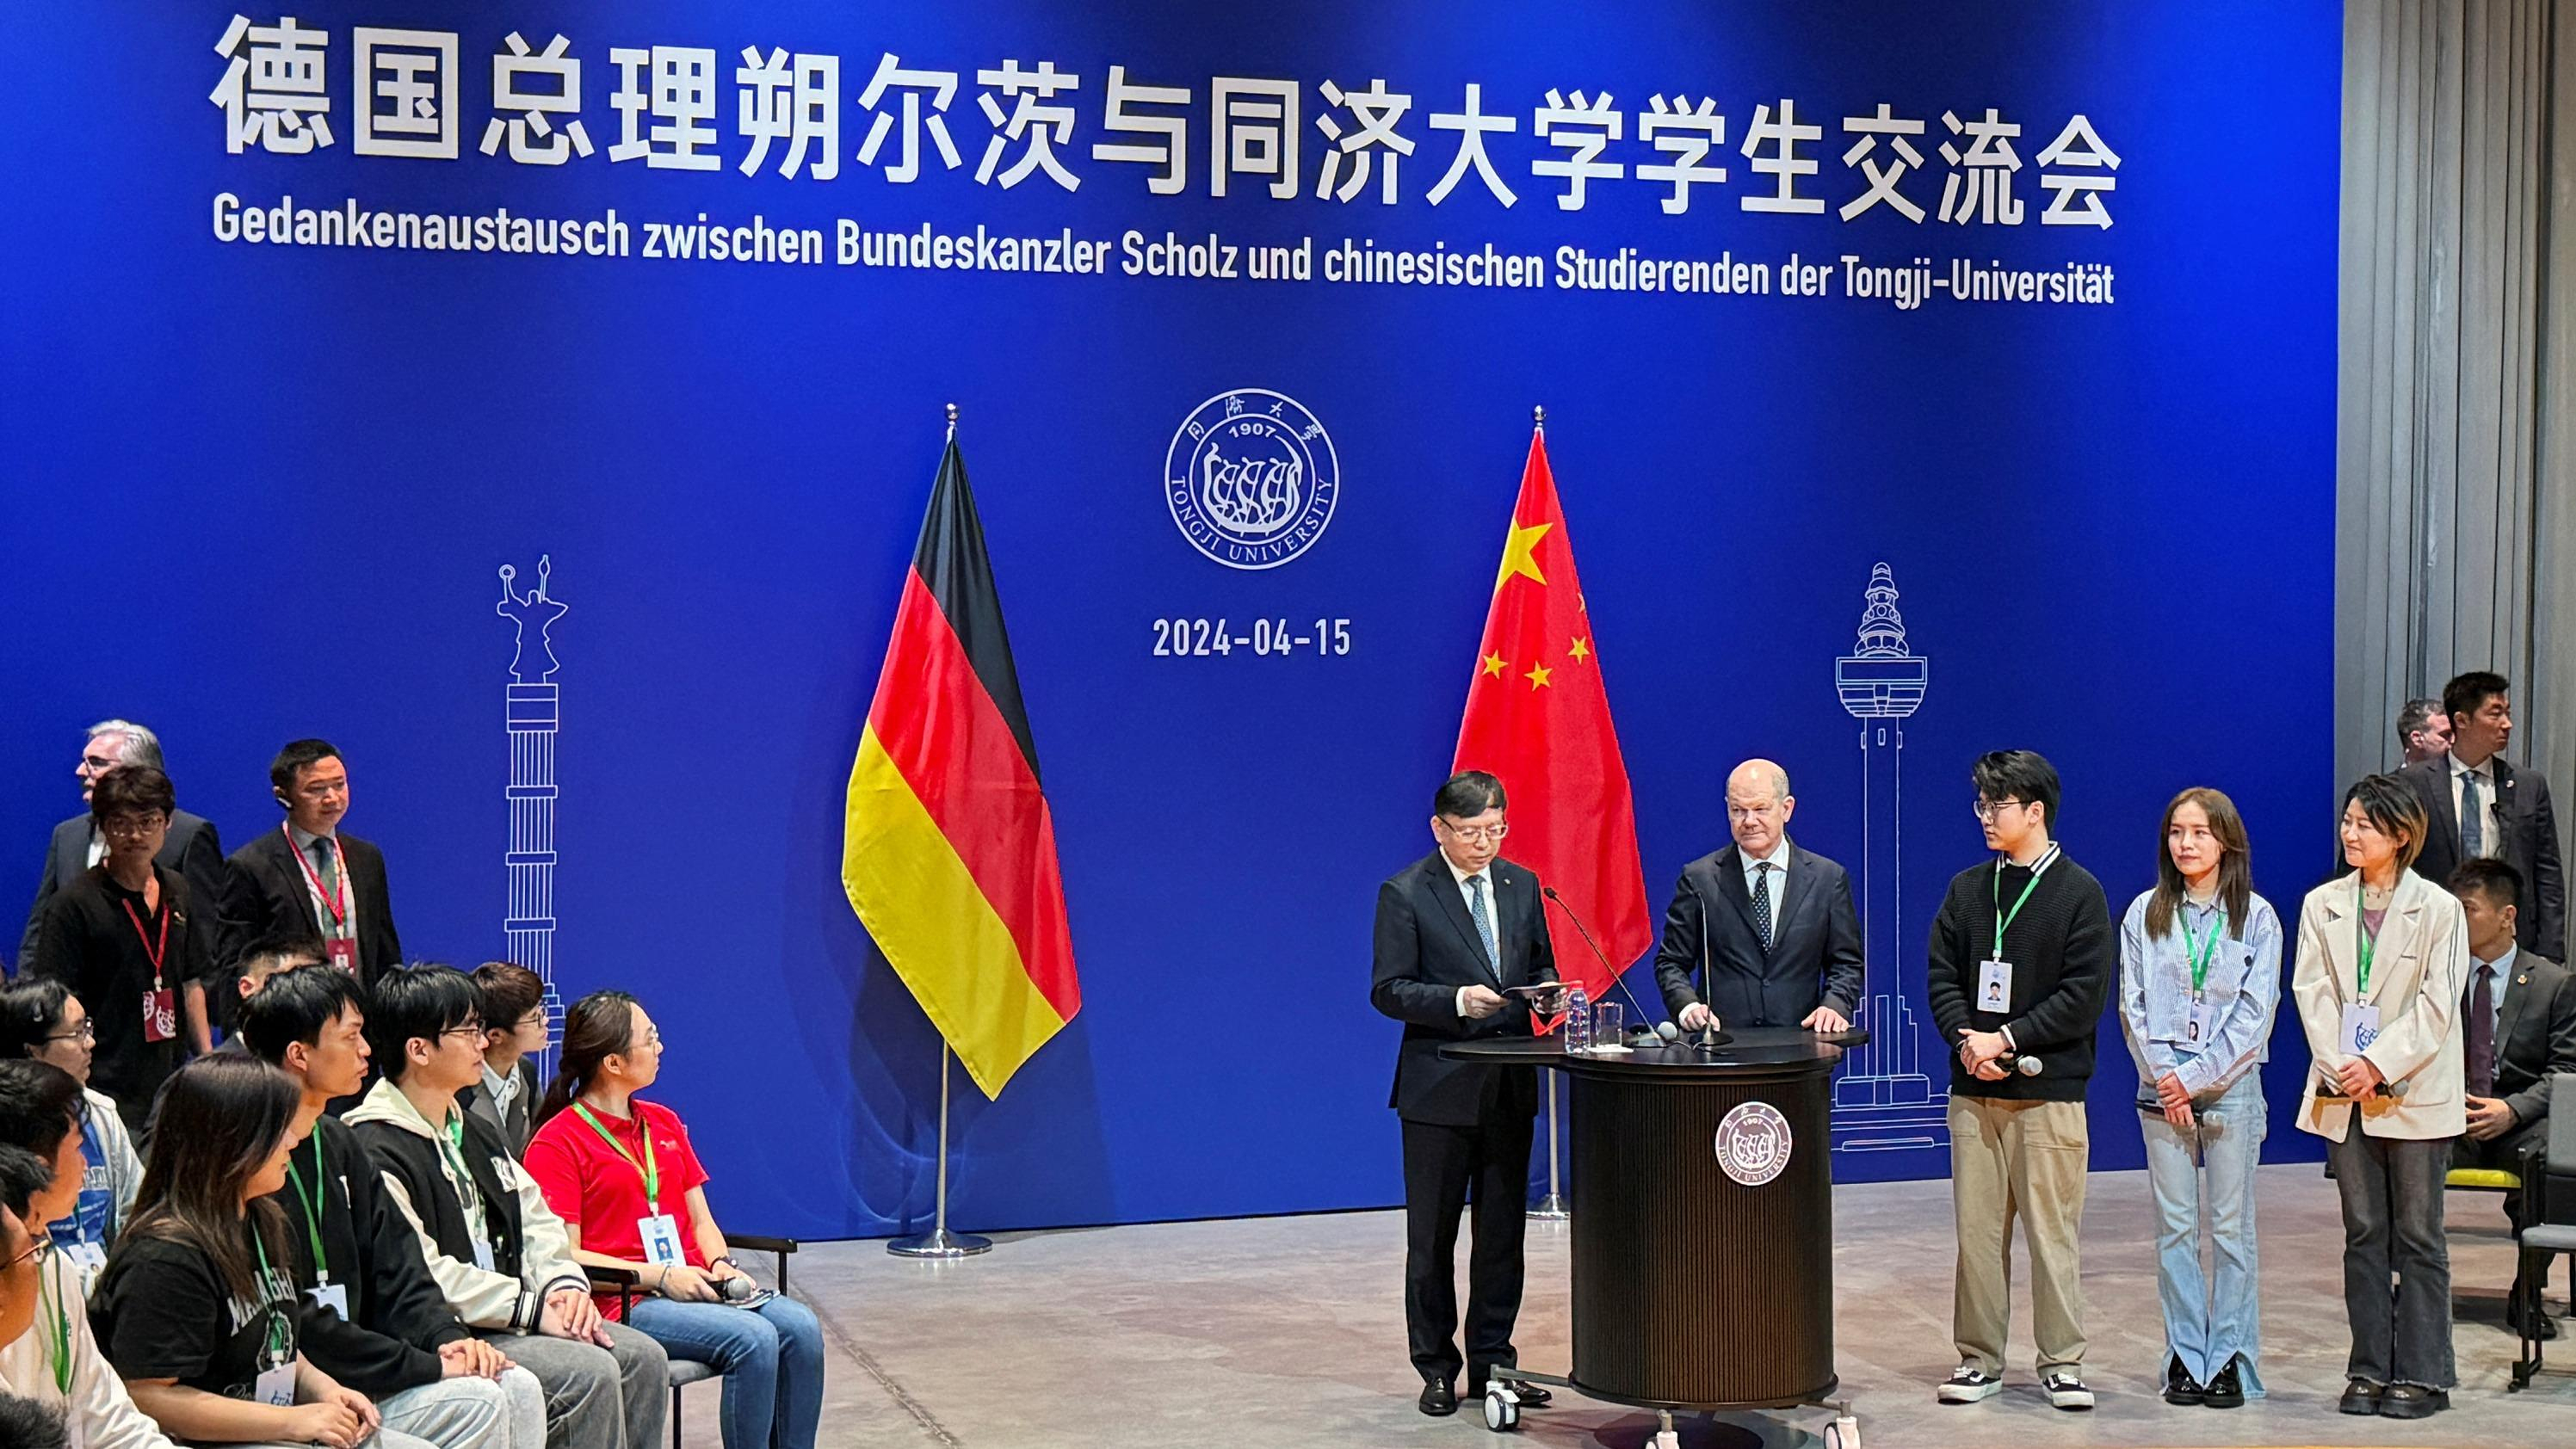 Faced with an anxious Chinese student, Olaf Scholz assures that not everyone smokes cannabis in Germany